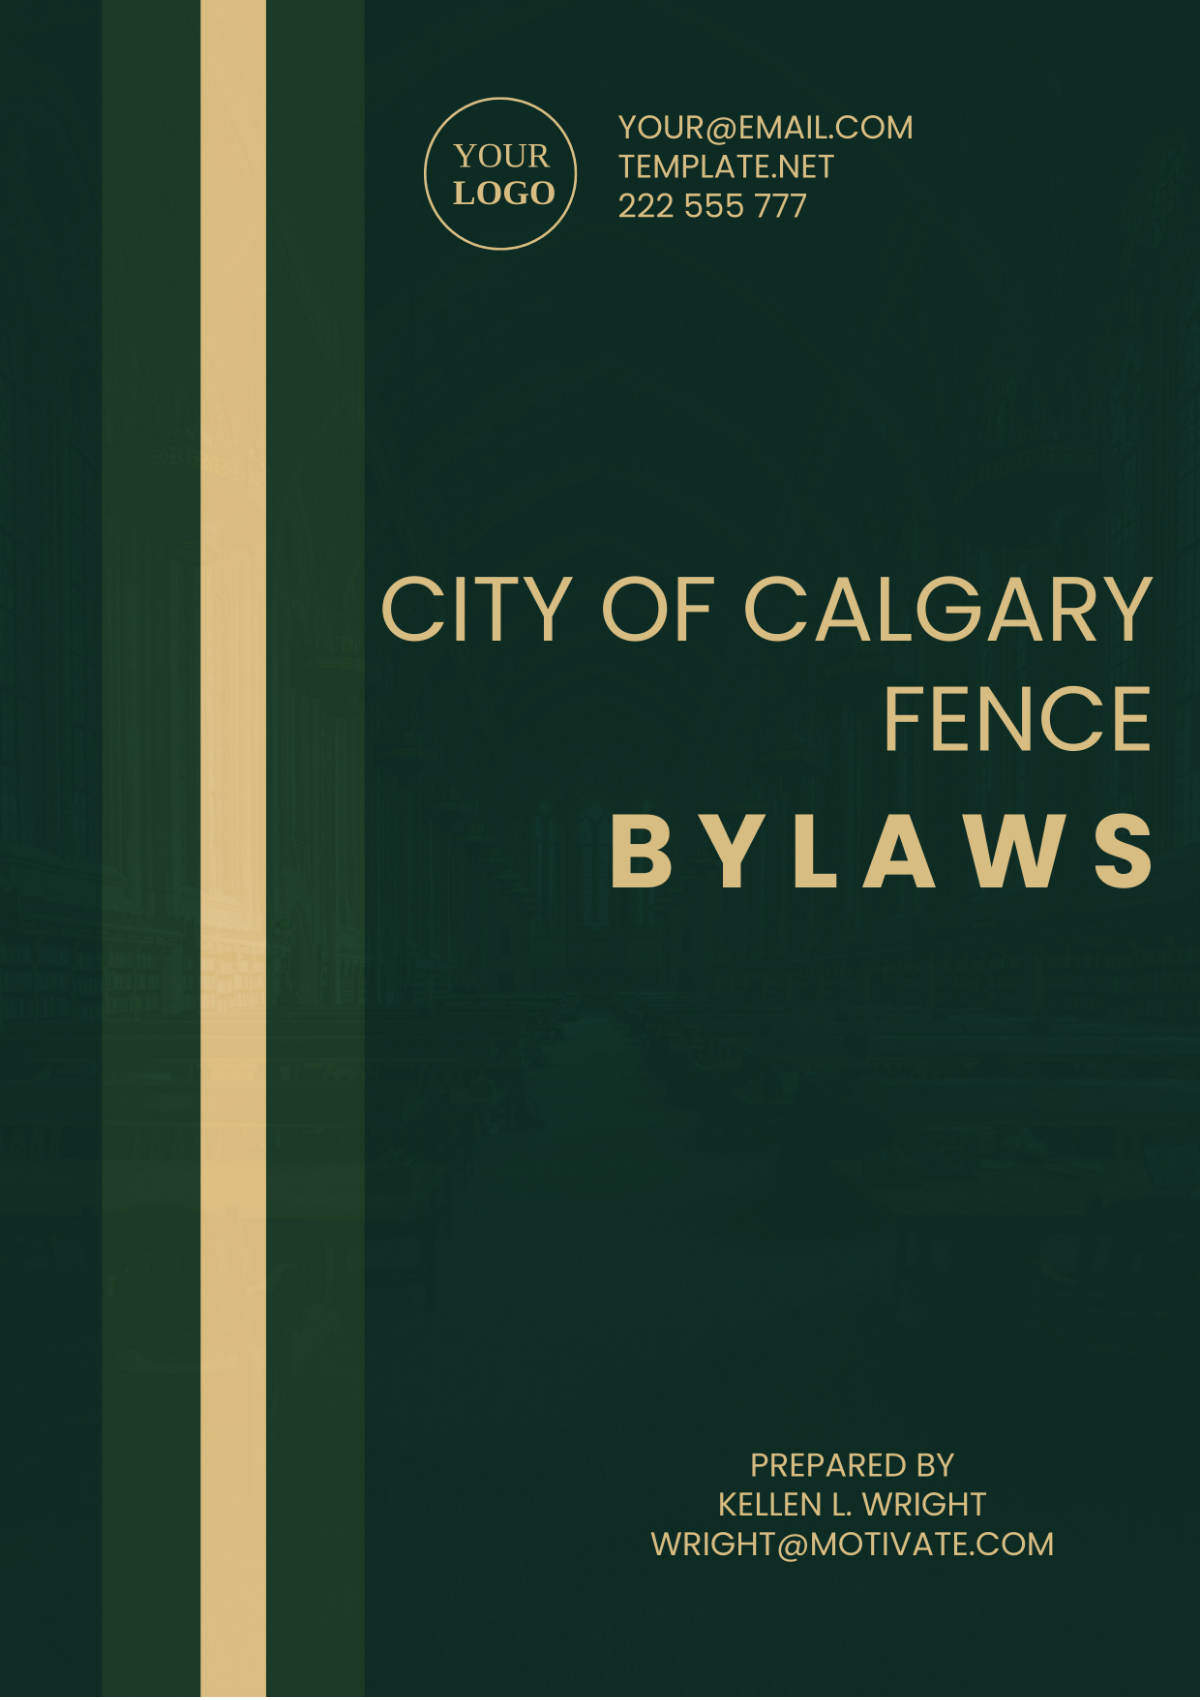 City Of Calgary Fence Bylaws Template